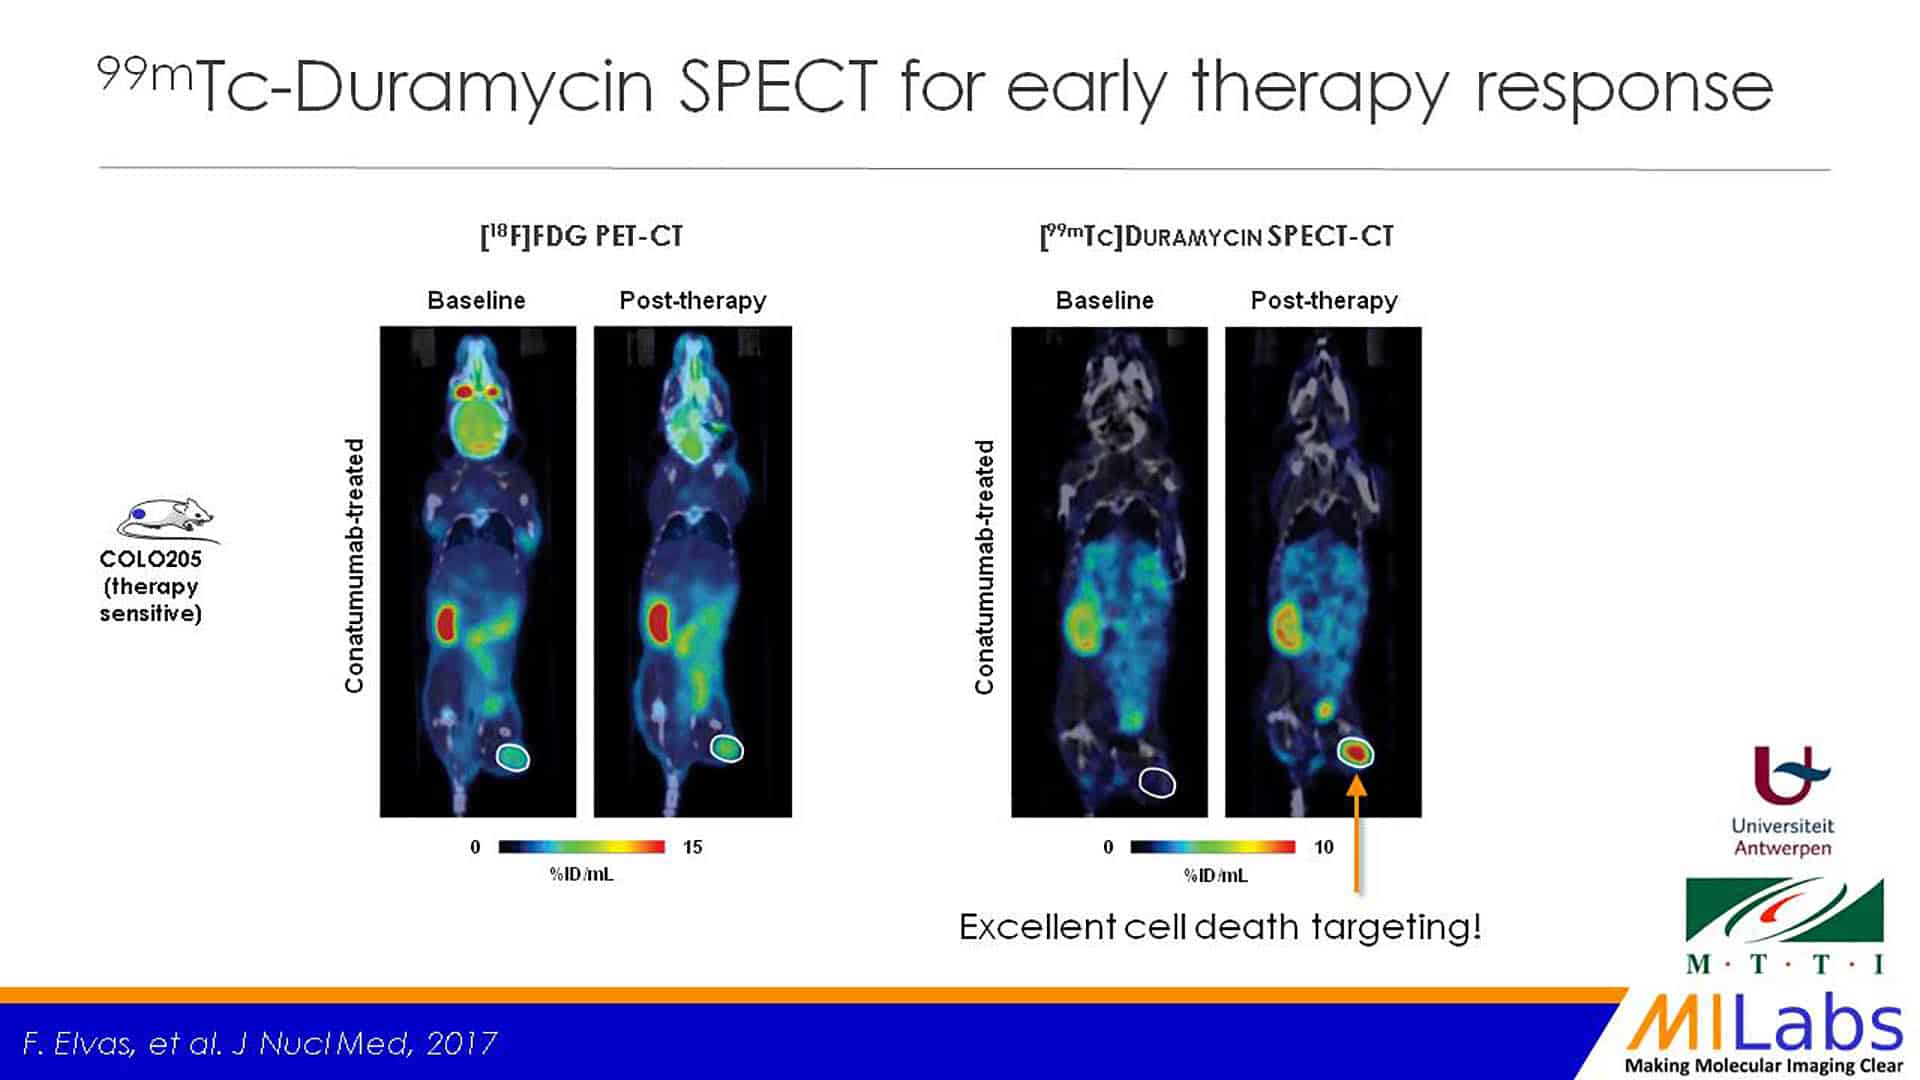 preclinical SPECT imaging of duramycin for early therapy response